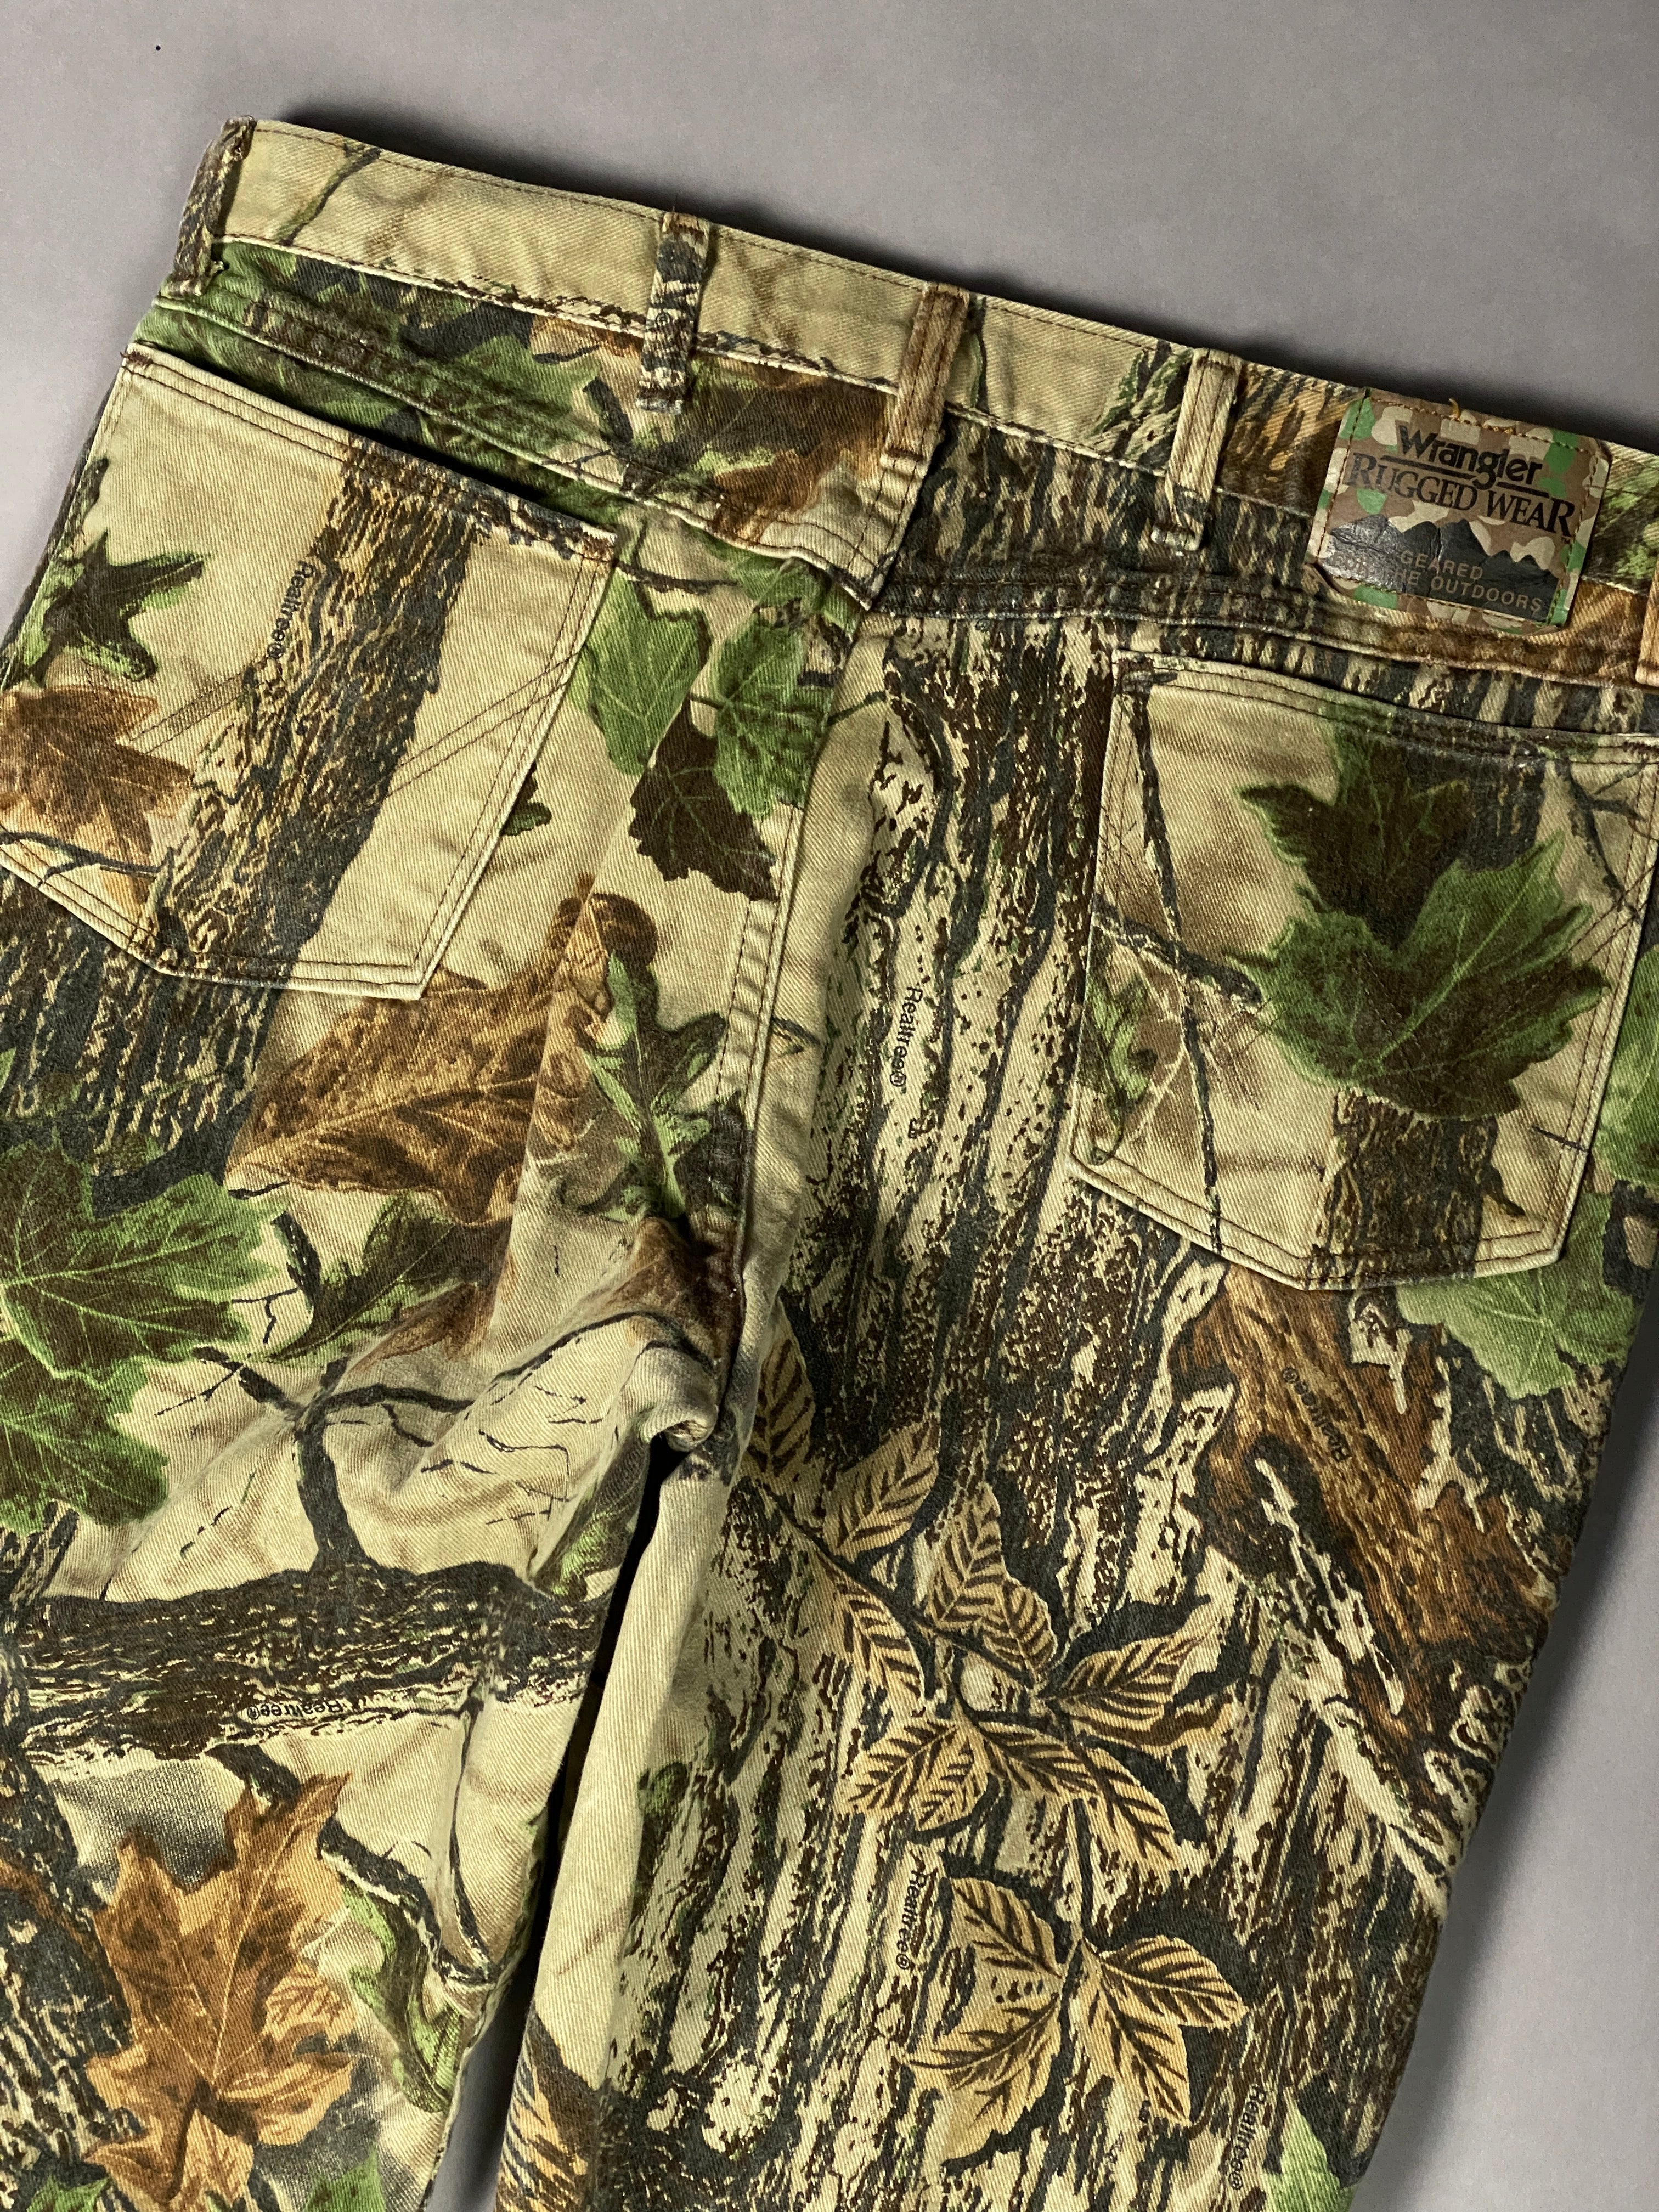 Vintage Wrangler Realtree Camo Jeans Pants 38x30 Camouflage Hunting |  Grailed